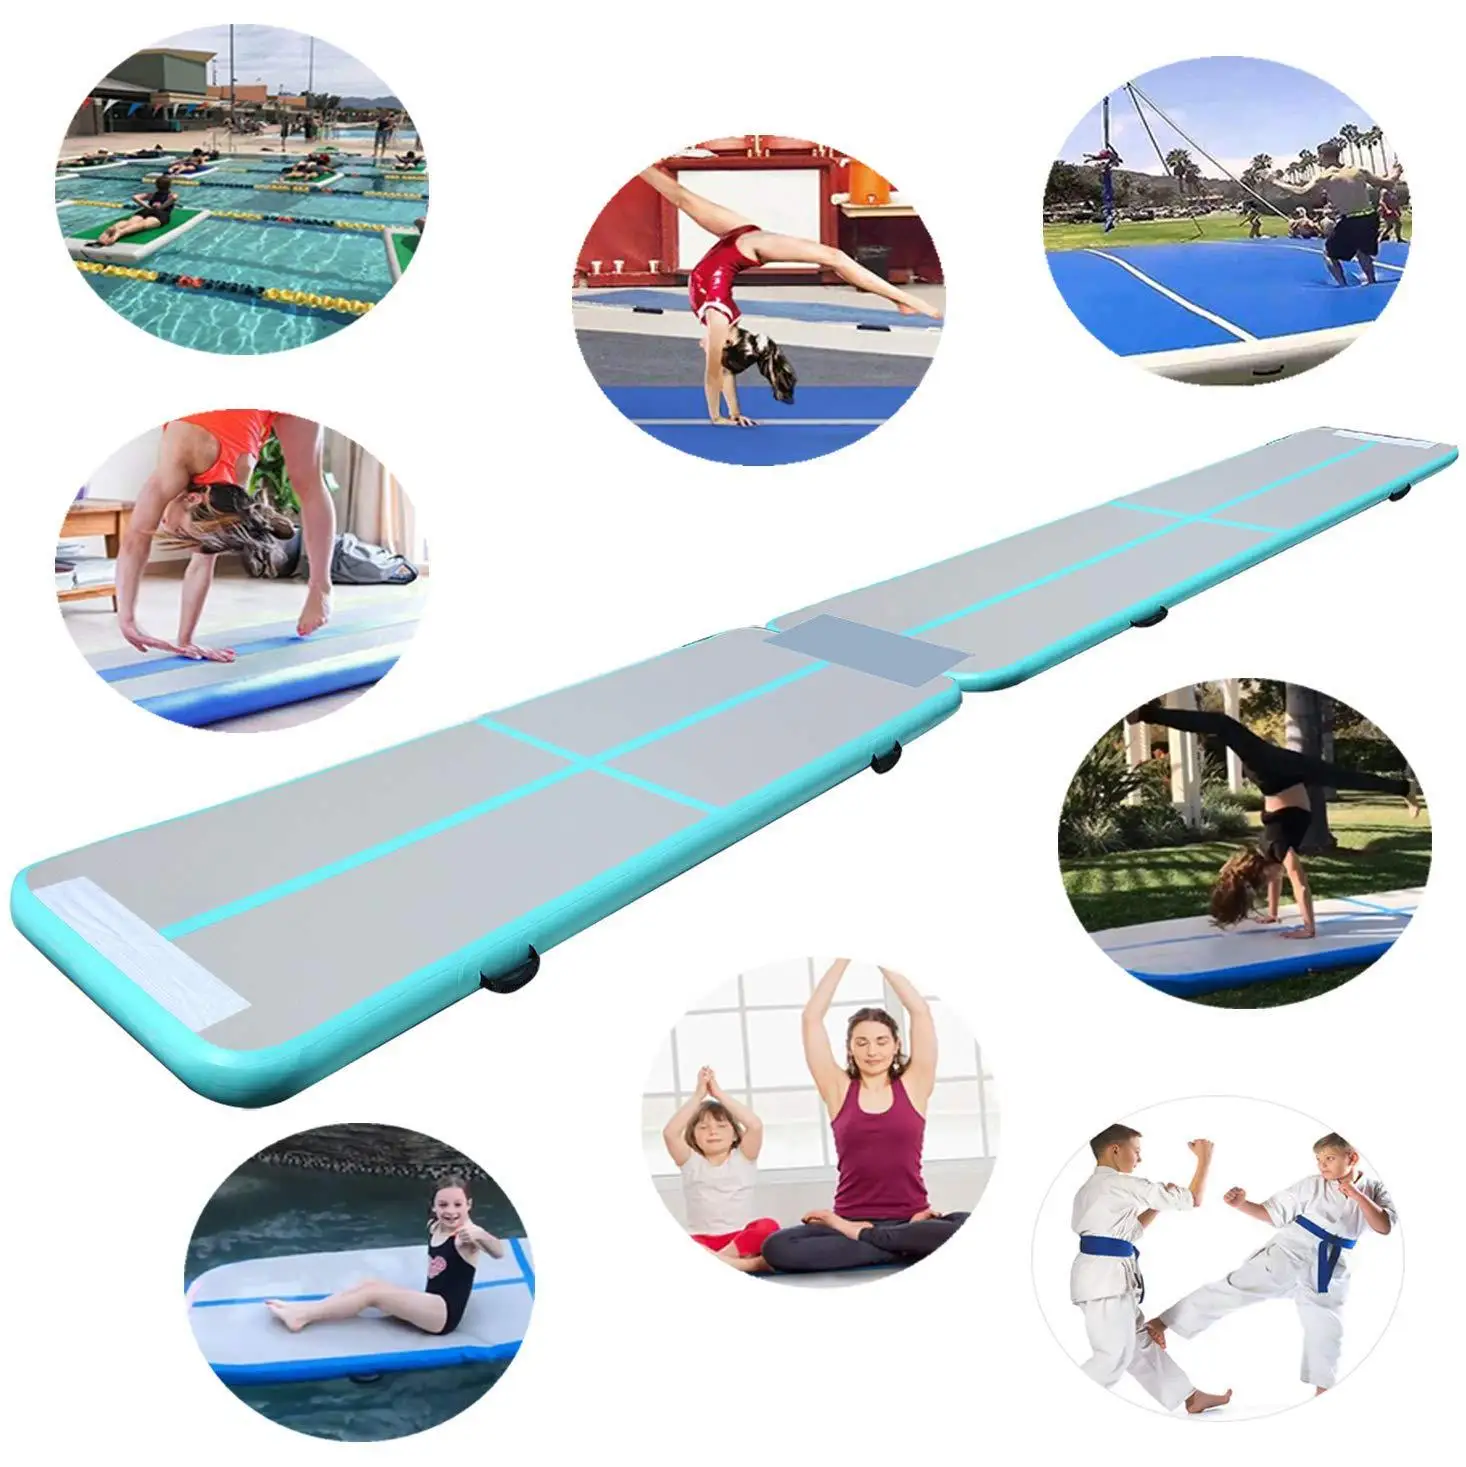 10ft/13ft/16ft/20ft Air Track Inflatable Gymnastics Tumbling Air Track Mat Air Pump Cheer leading/Practice Gymnastics